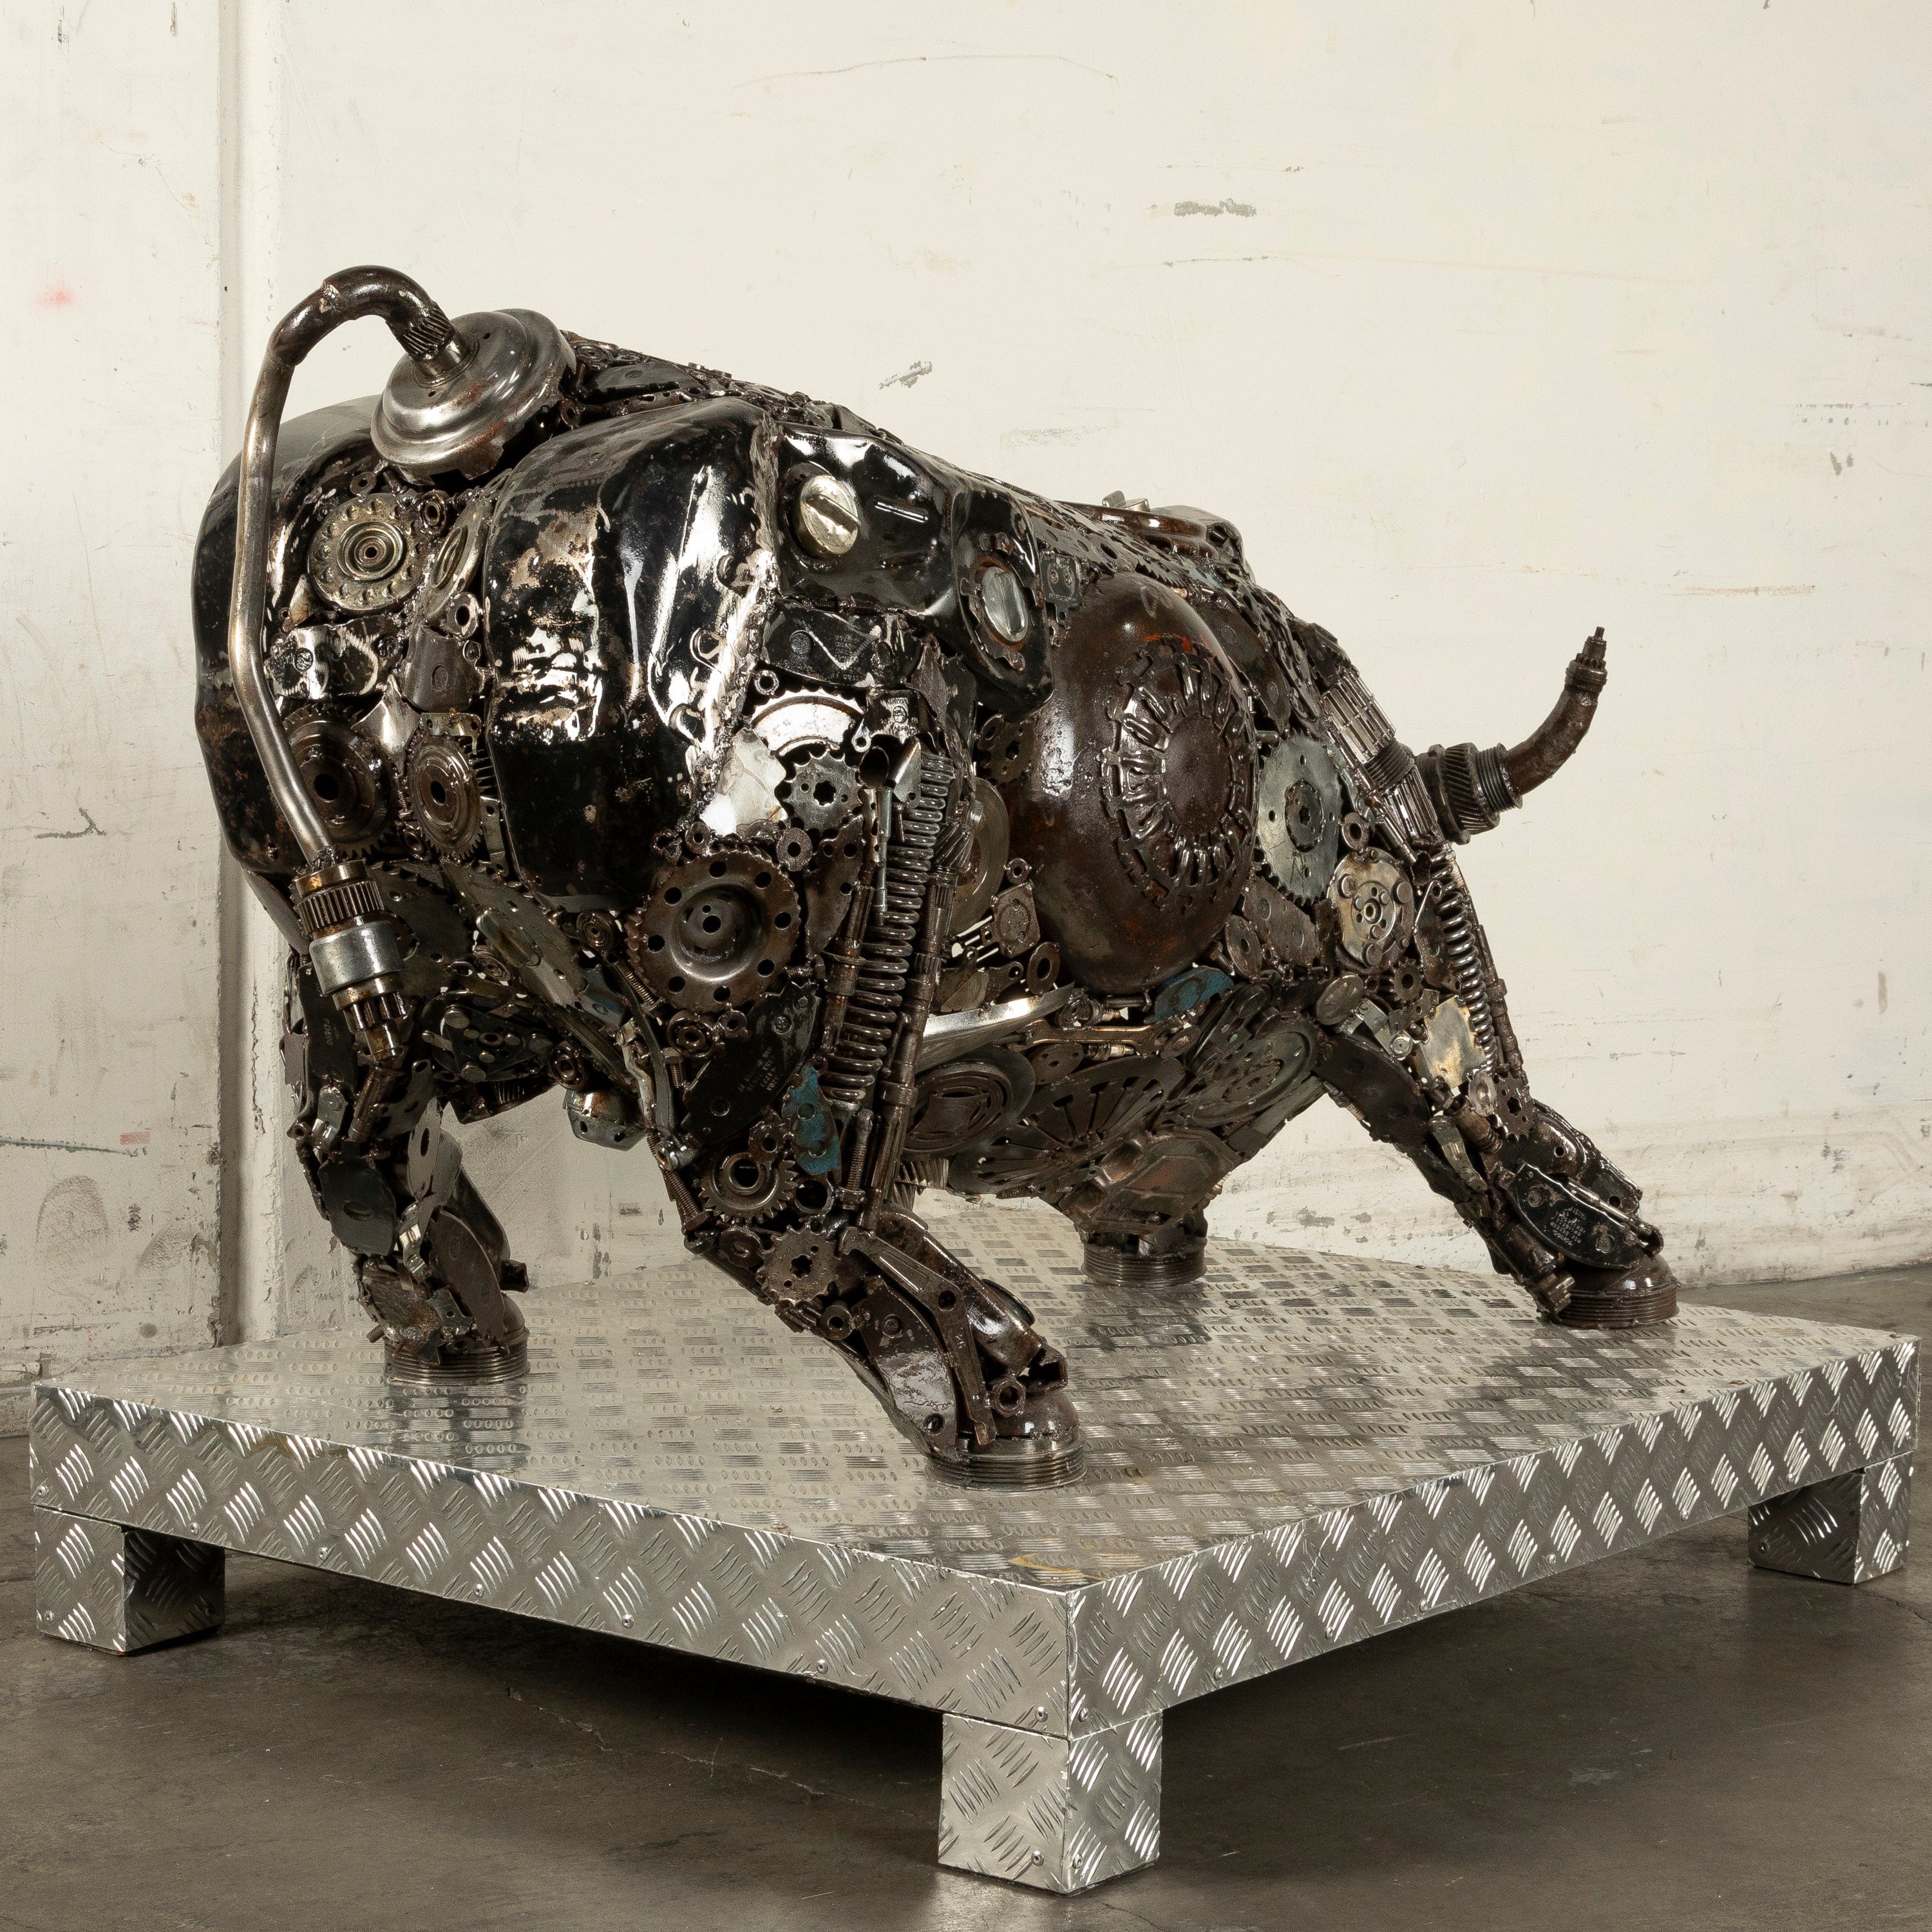 Kalifano Recycled Metal Art 60" Wall Street Bull Inspired Recycled Metal Art Sculpture RMS-BULL150-N